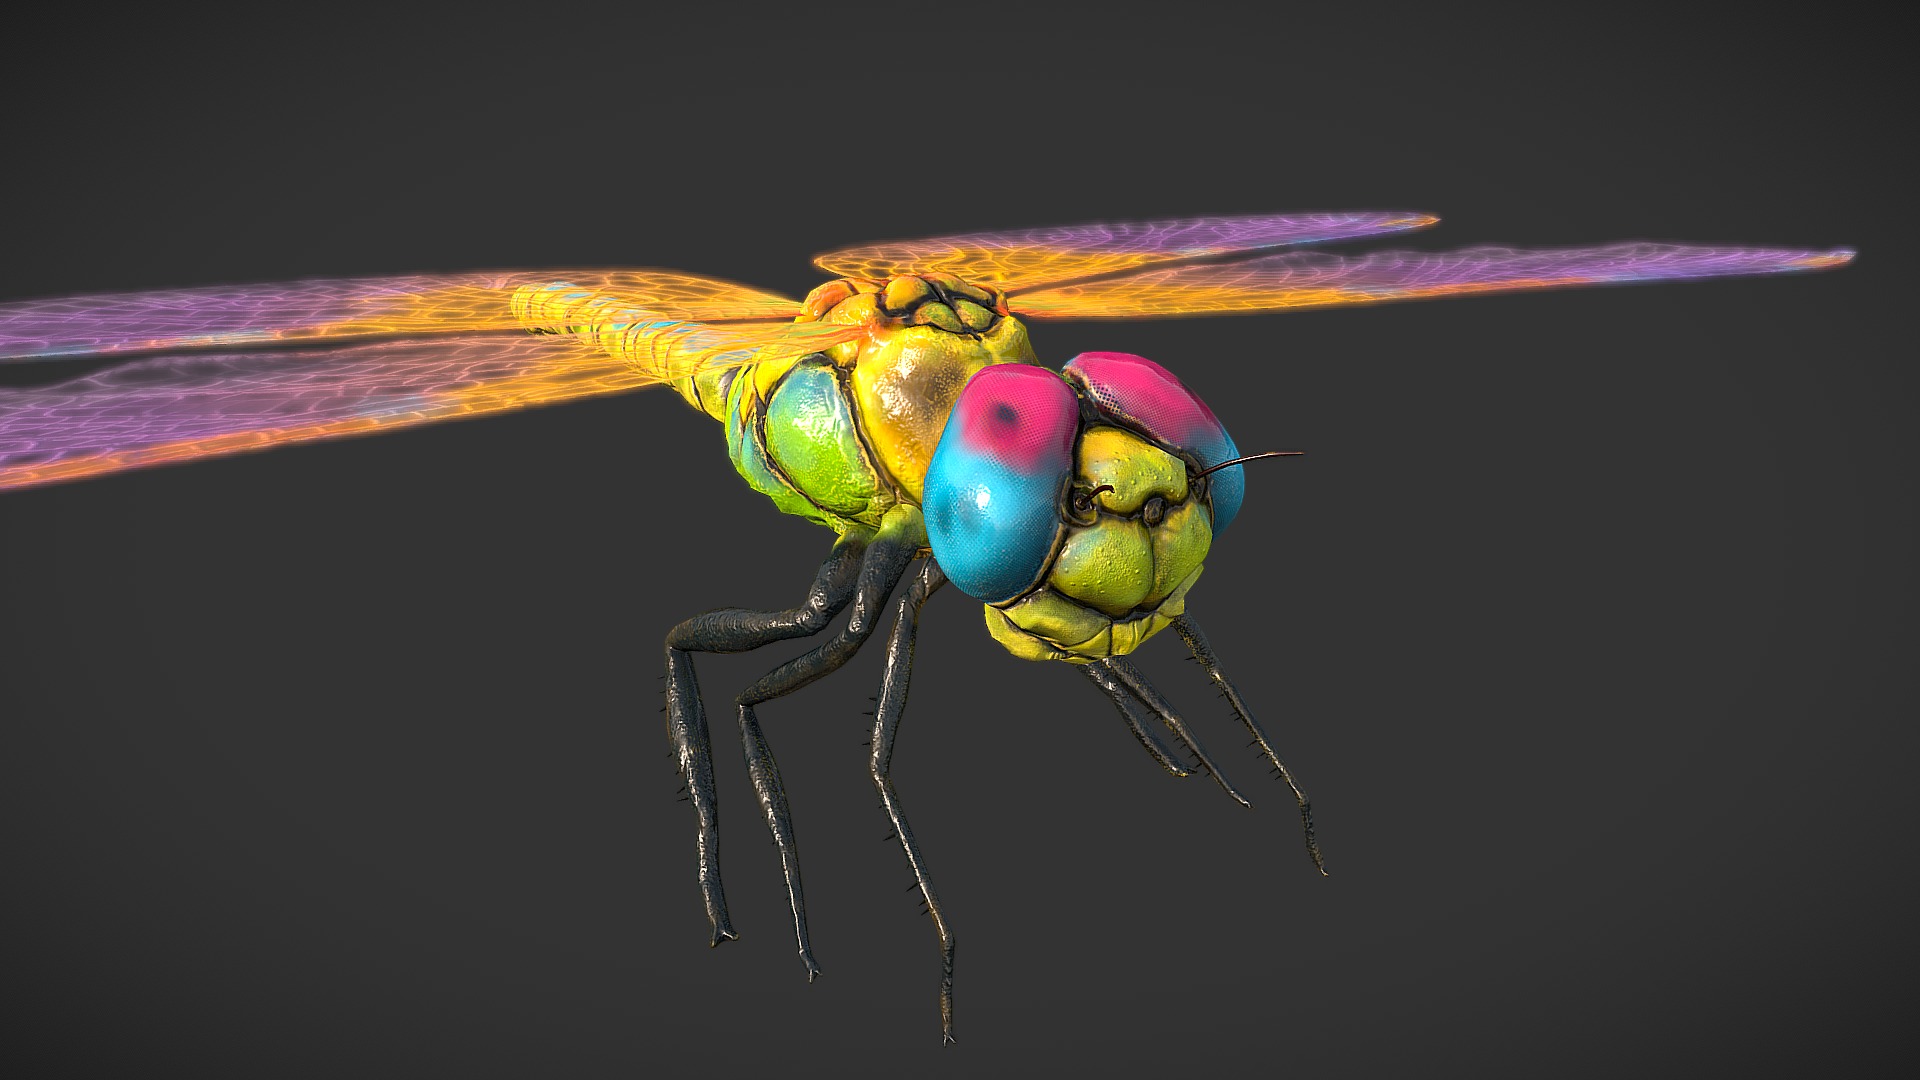 3D model Low poly detailed colorful dragonfly - This is a 3D model of the Low poly detailed colorful dragonfly. The 3D model is about a colorful insect with wings.